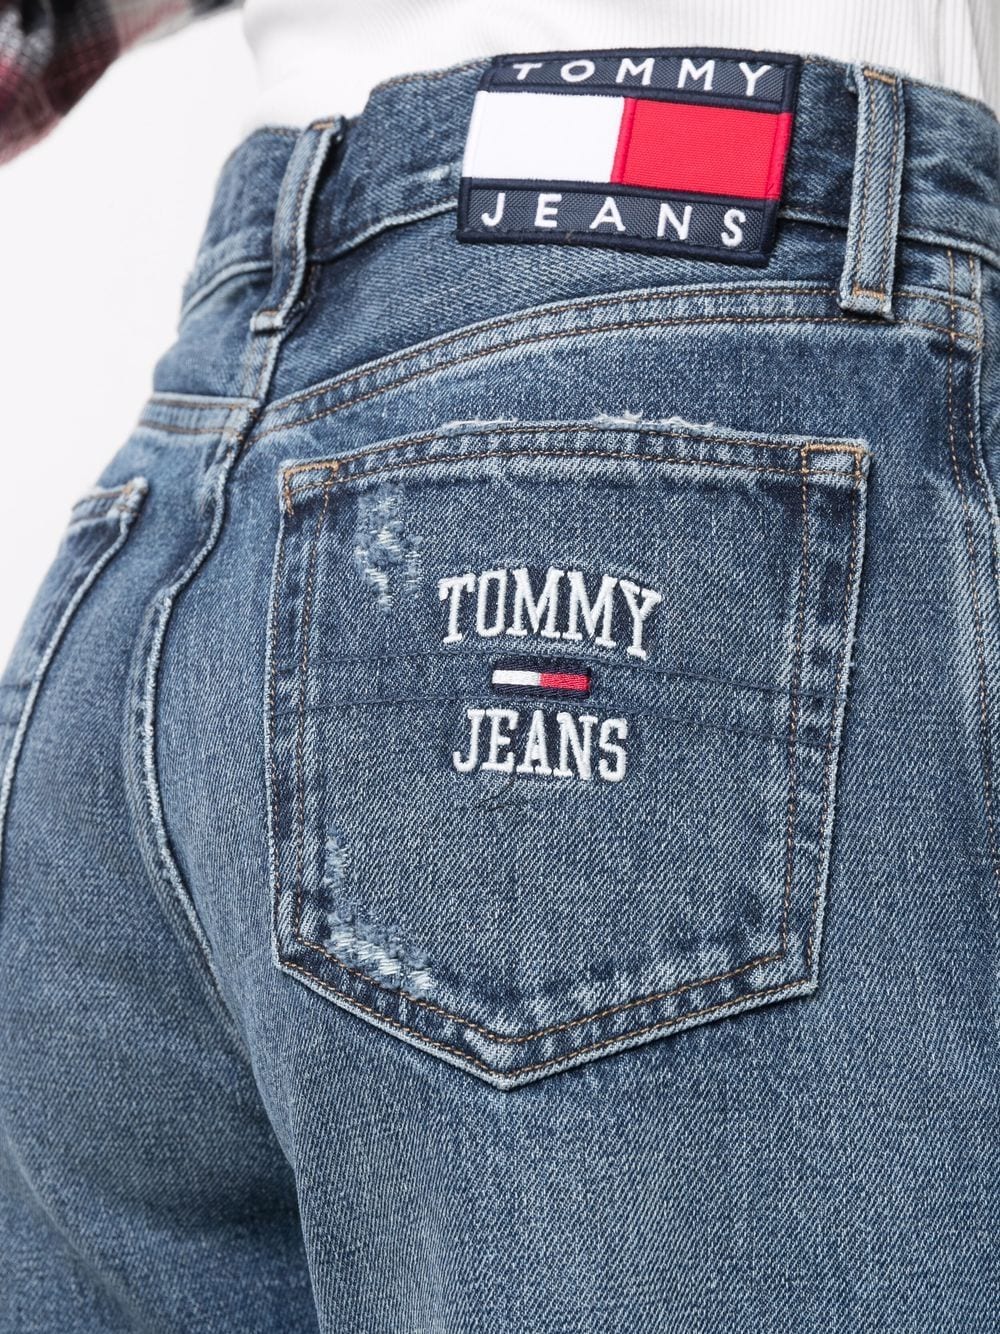 Tommy Jeans embroidered-logo Detail Jeans - Farfetch